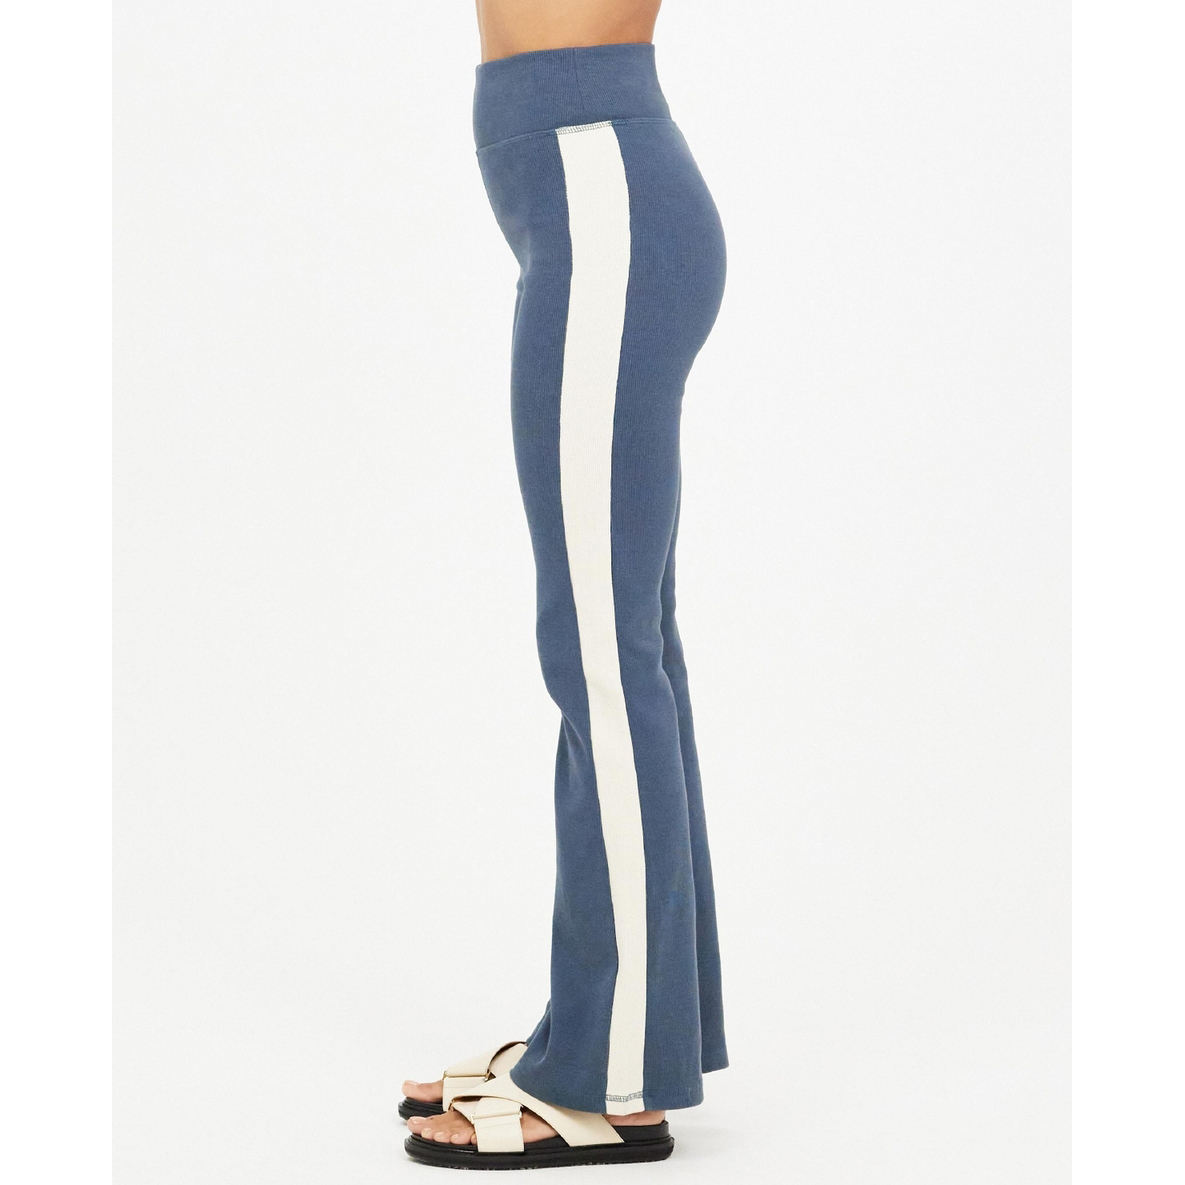 Stitching Color Fitted Style Colour Block Panels at Side Seams High-waisted Flared Pant in Denim